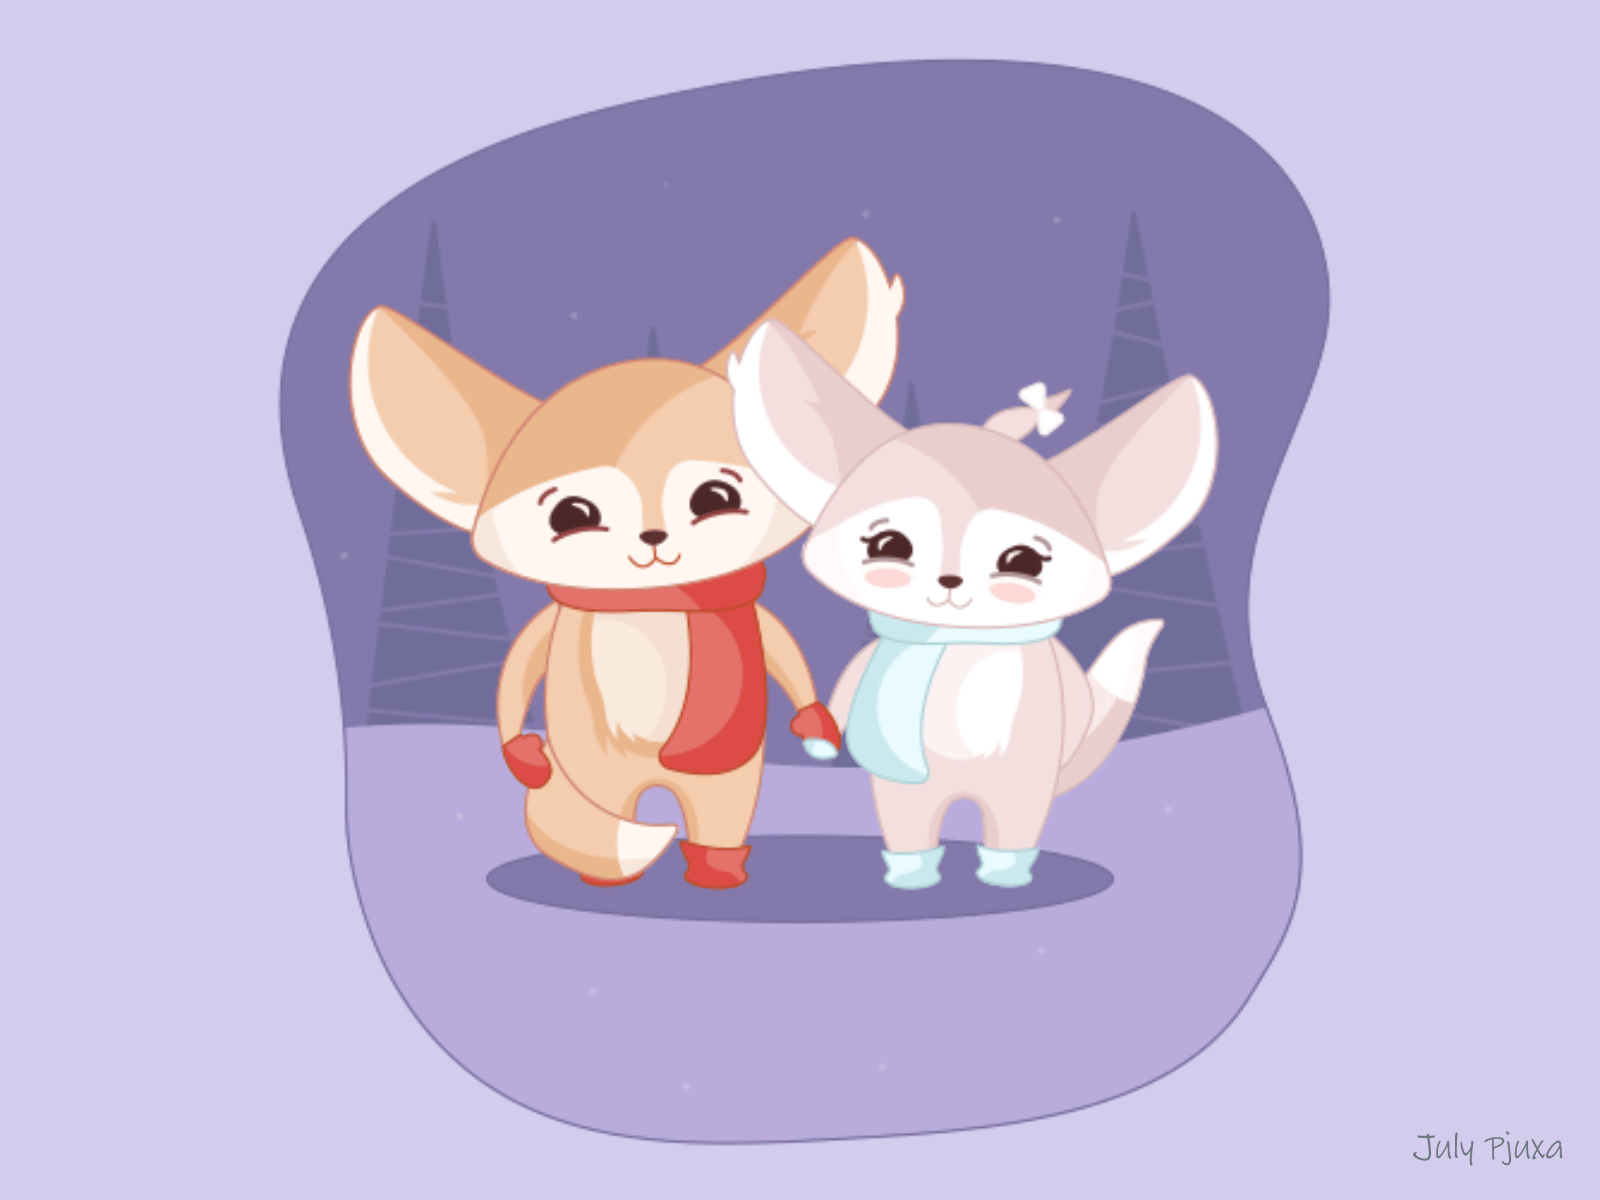 Christmas Fennec Fox: story 0.10 "Happiness"